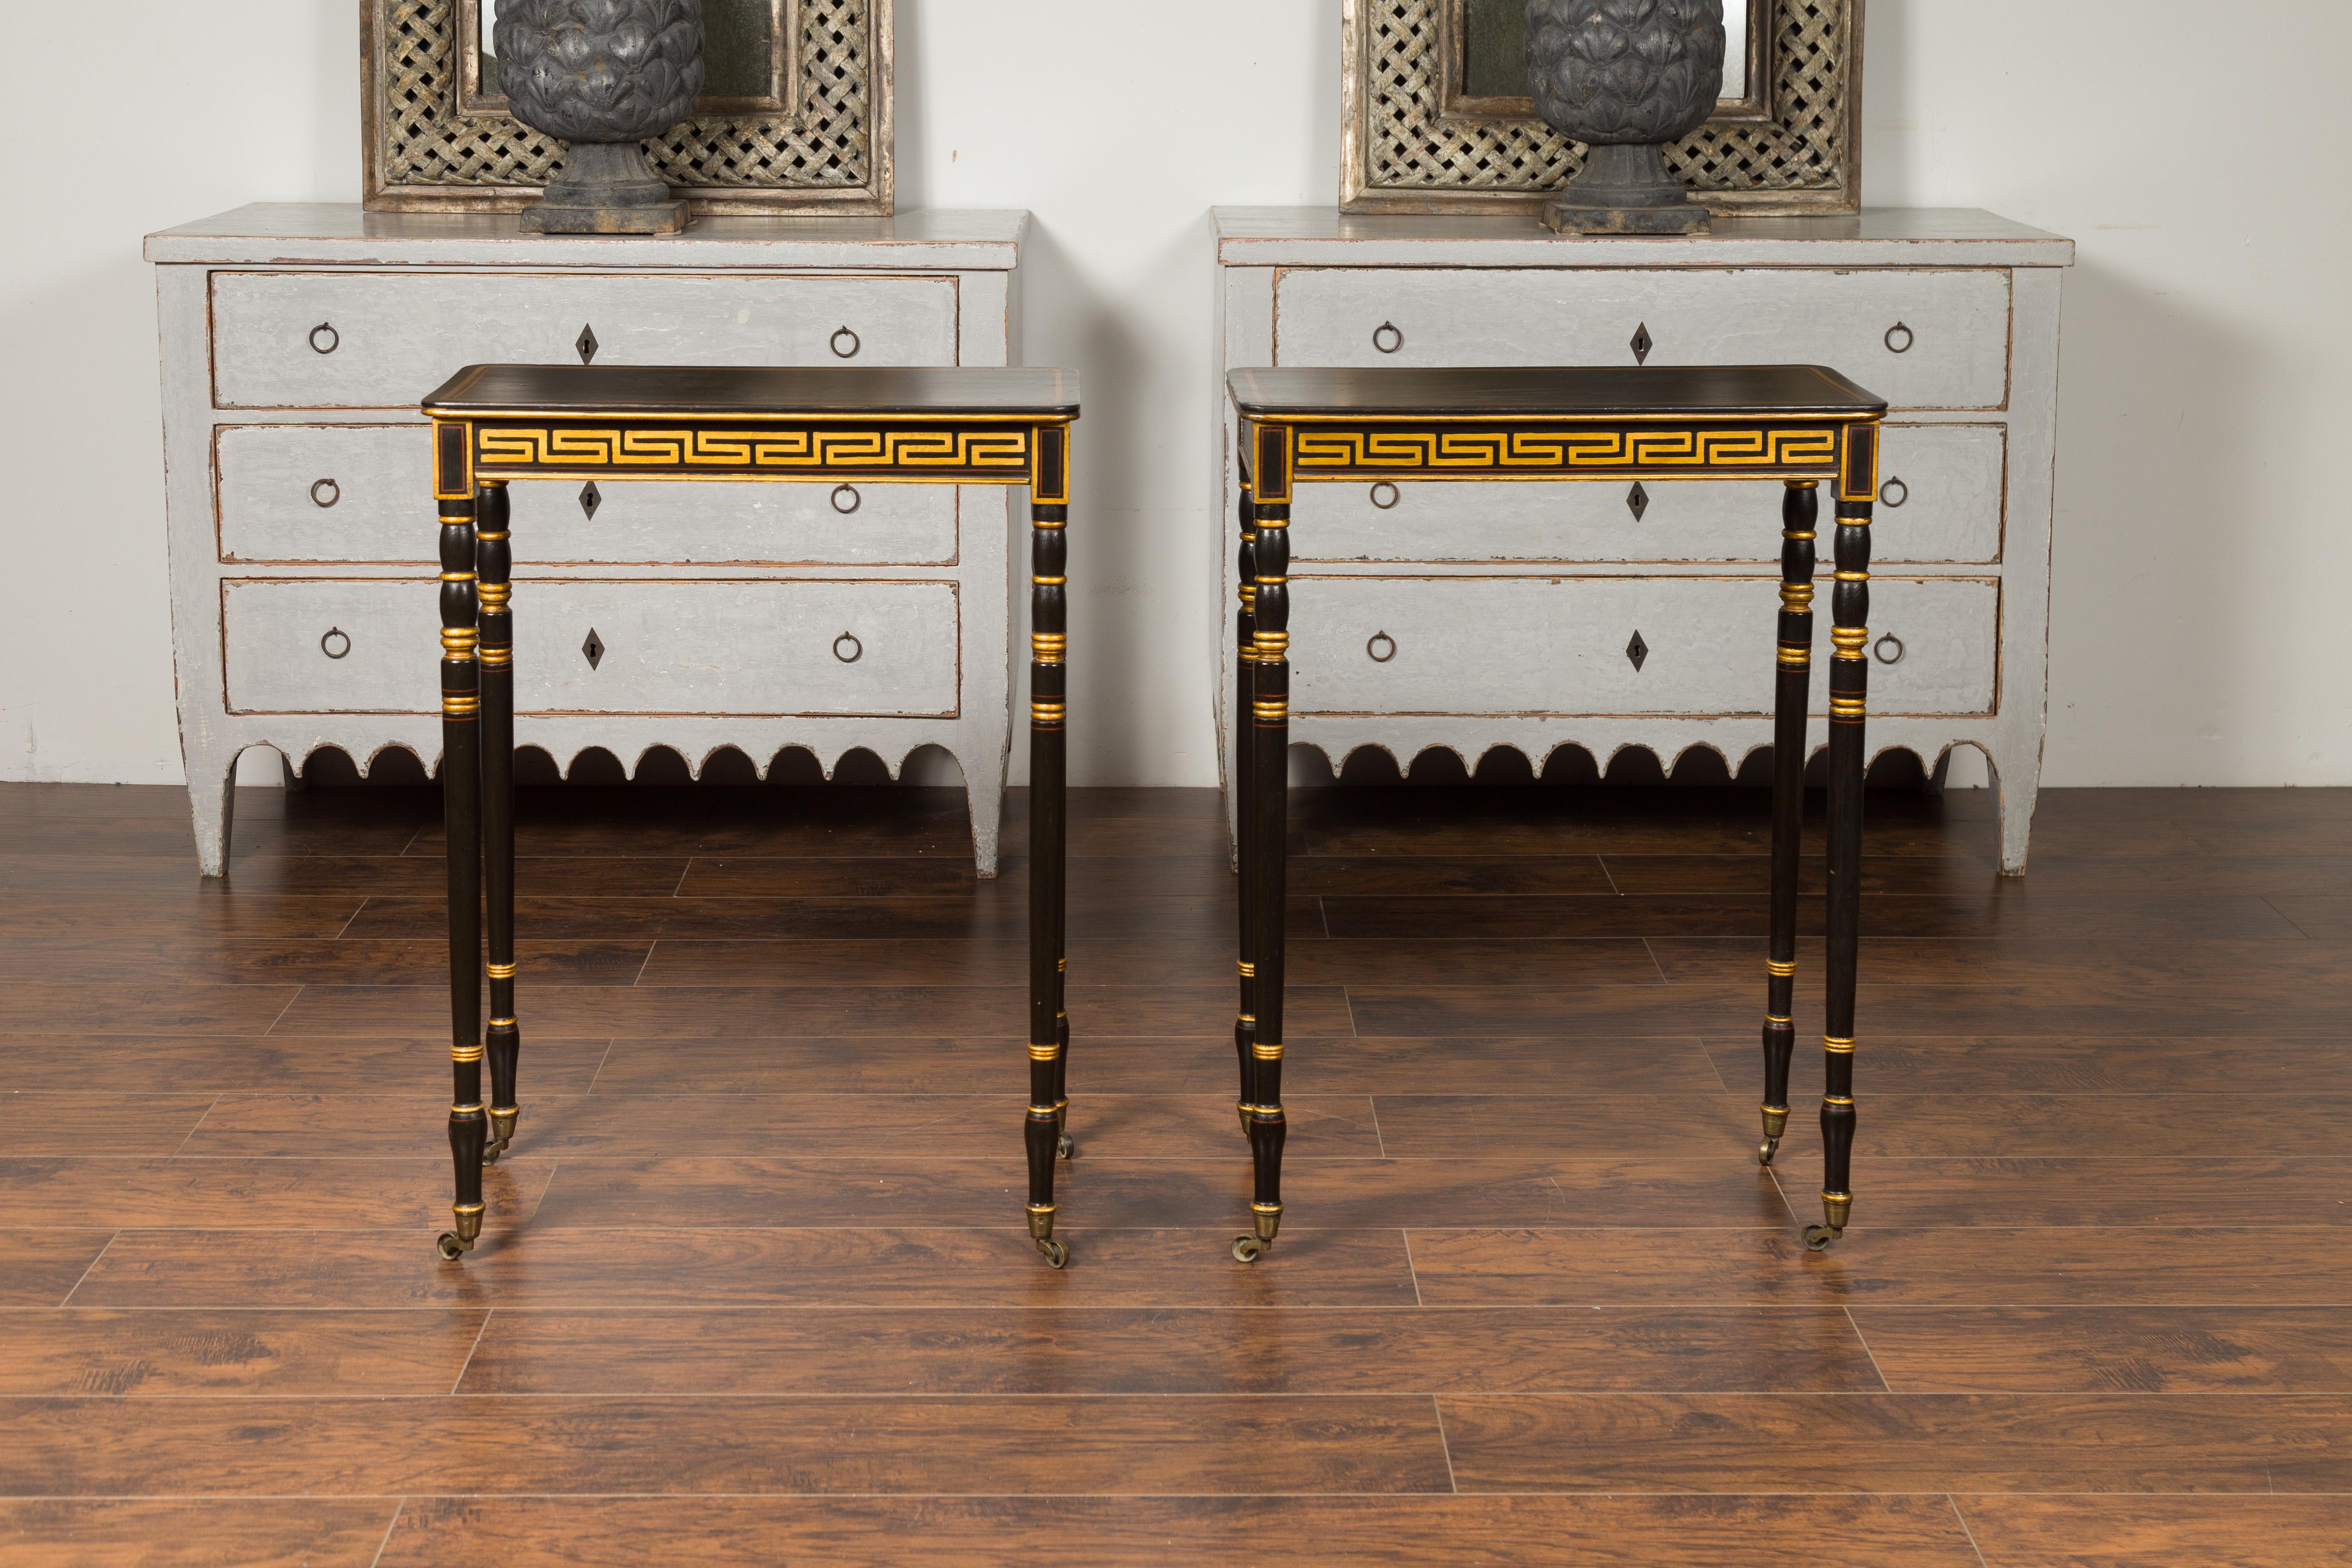 Pair of English Regency Period Ebonized Wood Console Tables with Gilt Greek Key In Good Condition For Sale In Atlanta, GA